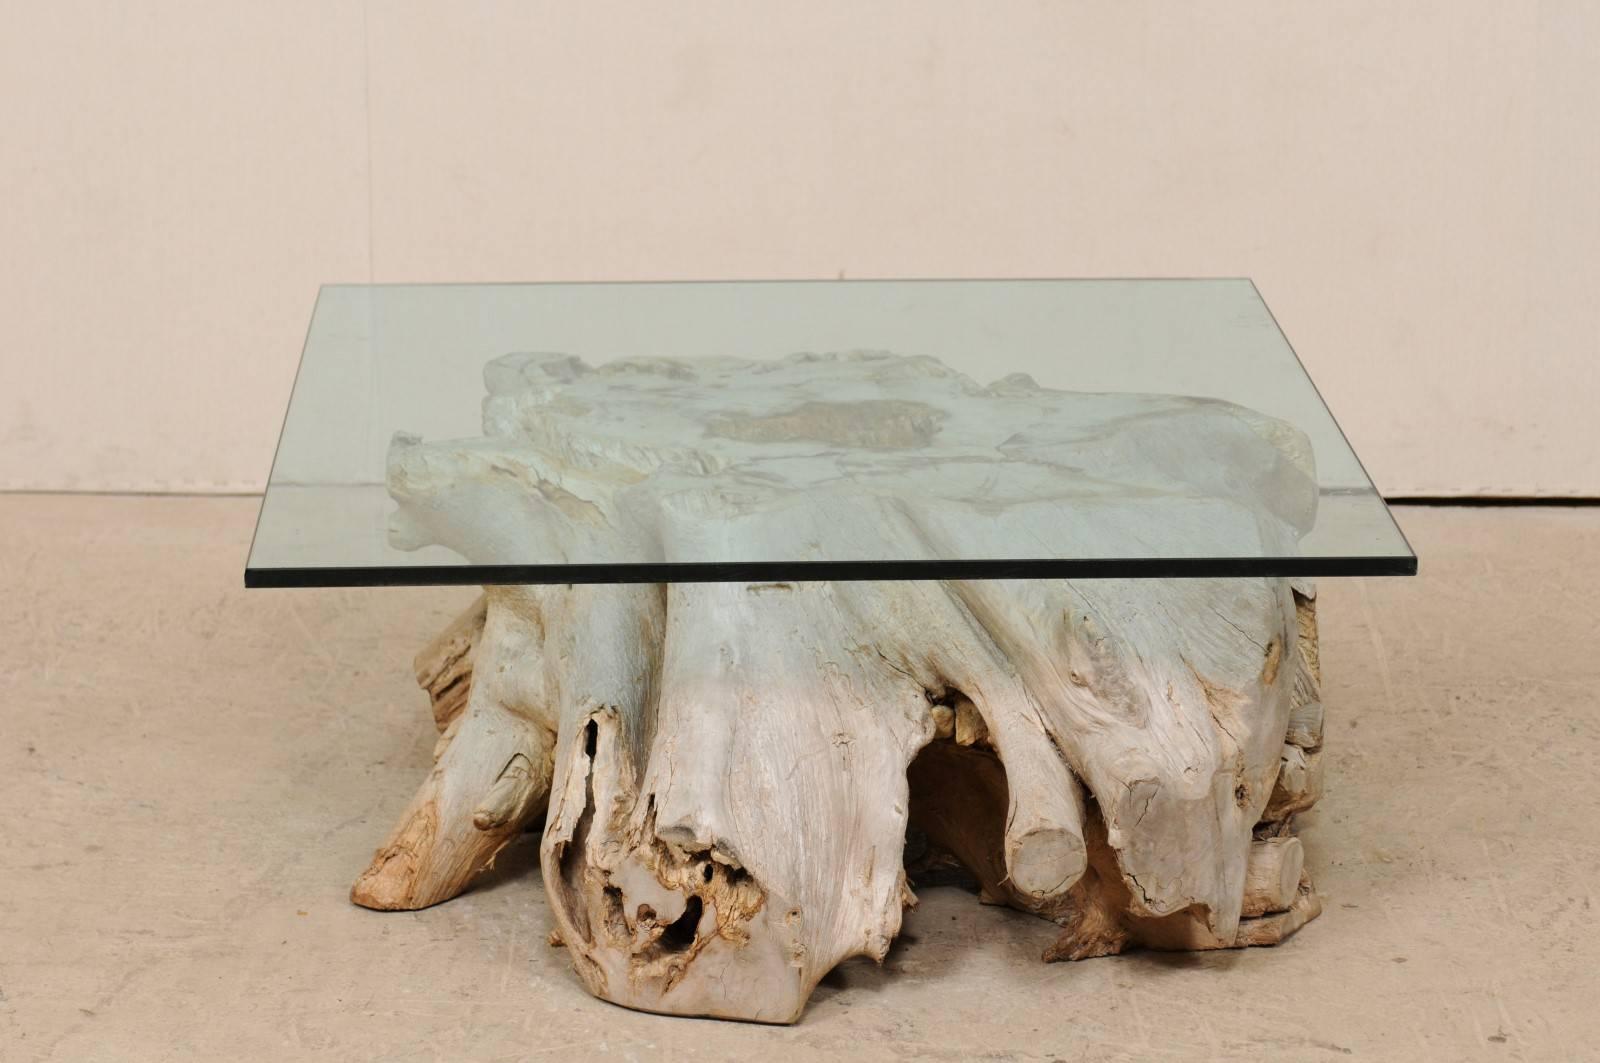 A European wooden tree root coffee table with glass top. This natural wood coffee table has been fashioned with the use of a 19th century European tree root/stump as it's base, and the addition of a newer, square-shaped glass top. The wood has a